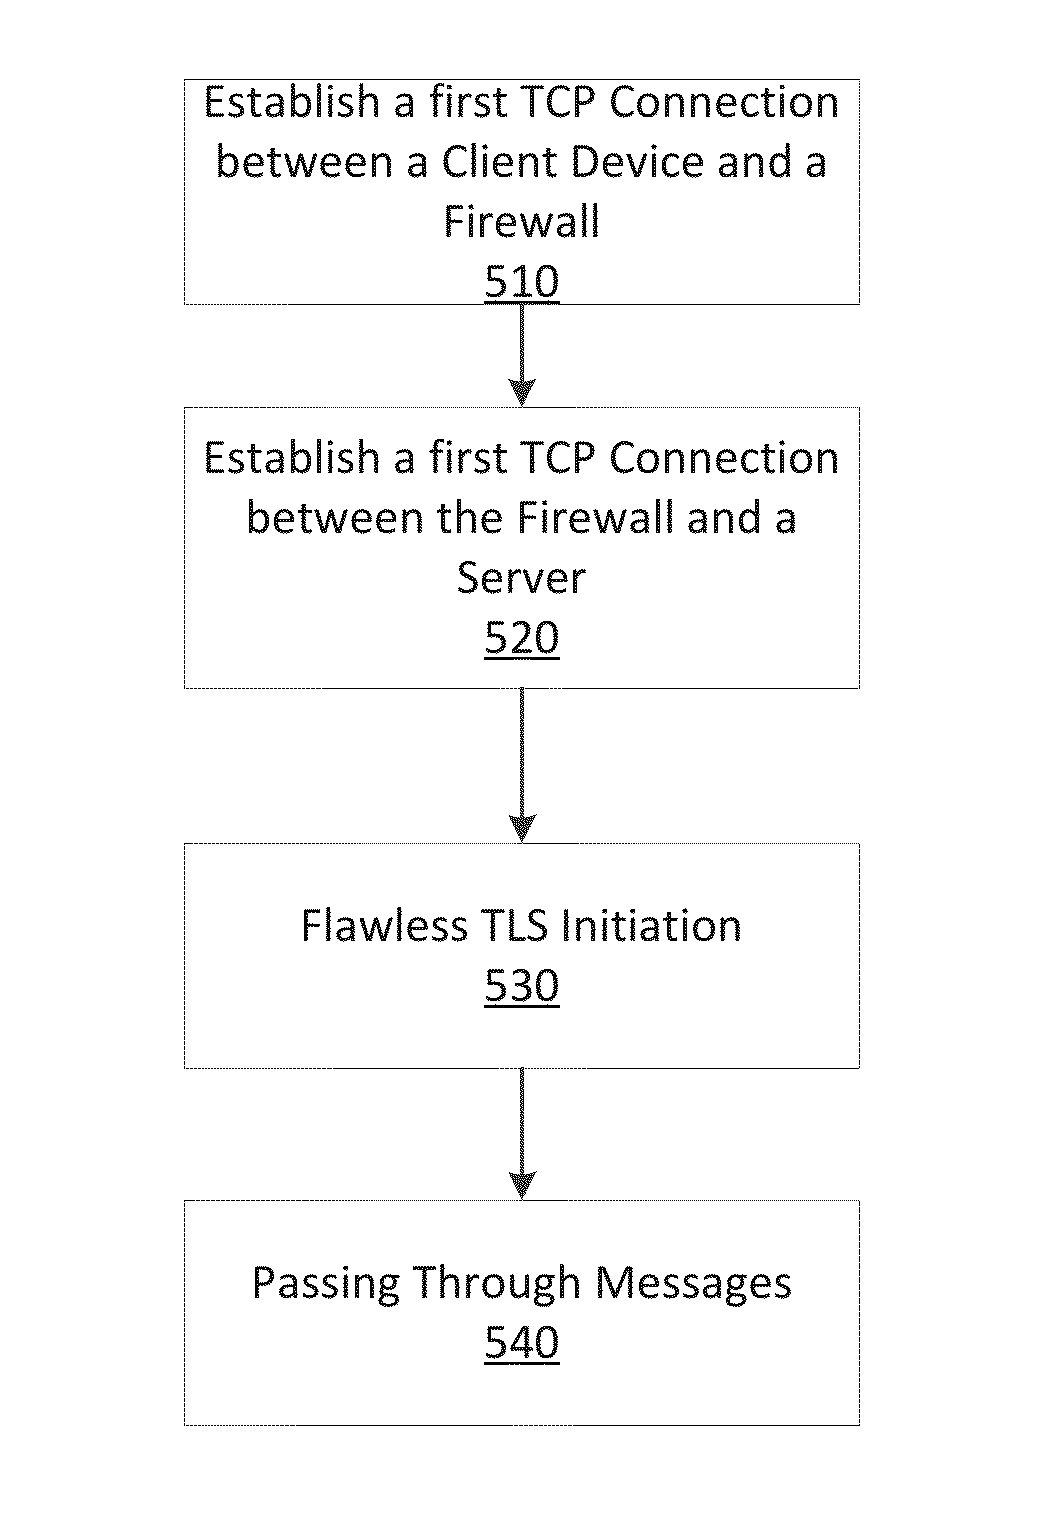 Dynamic bypass of tls connections matching exclusion list in dpi-ssl in a NAT deployment